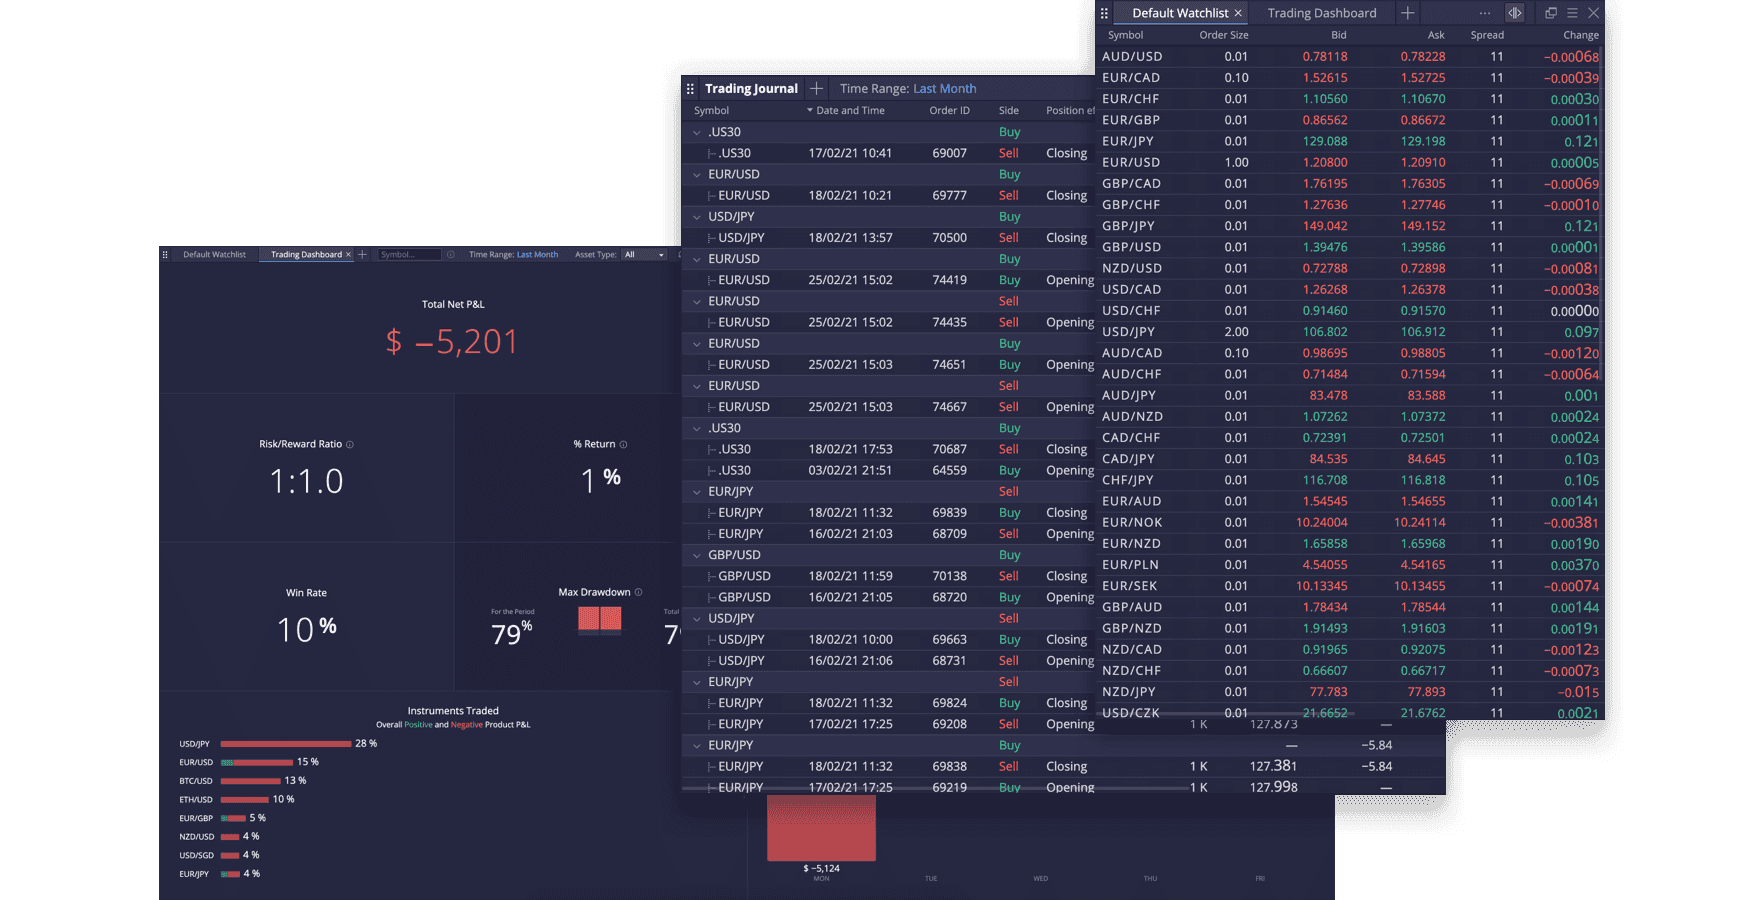 Deriv X dashboard with tools to track your online trading